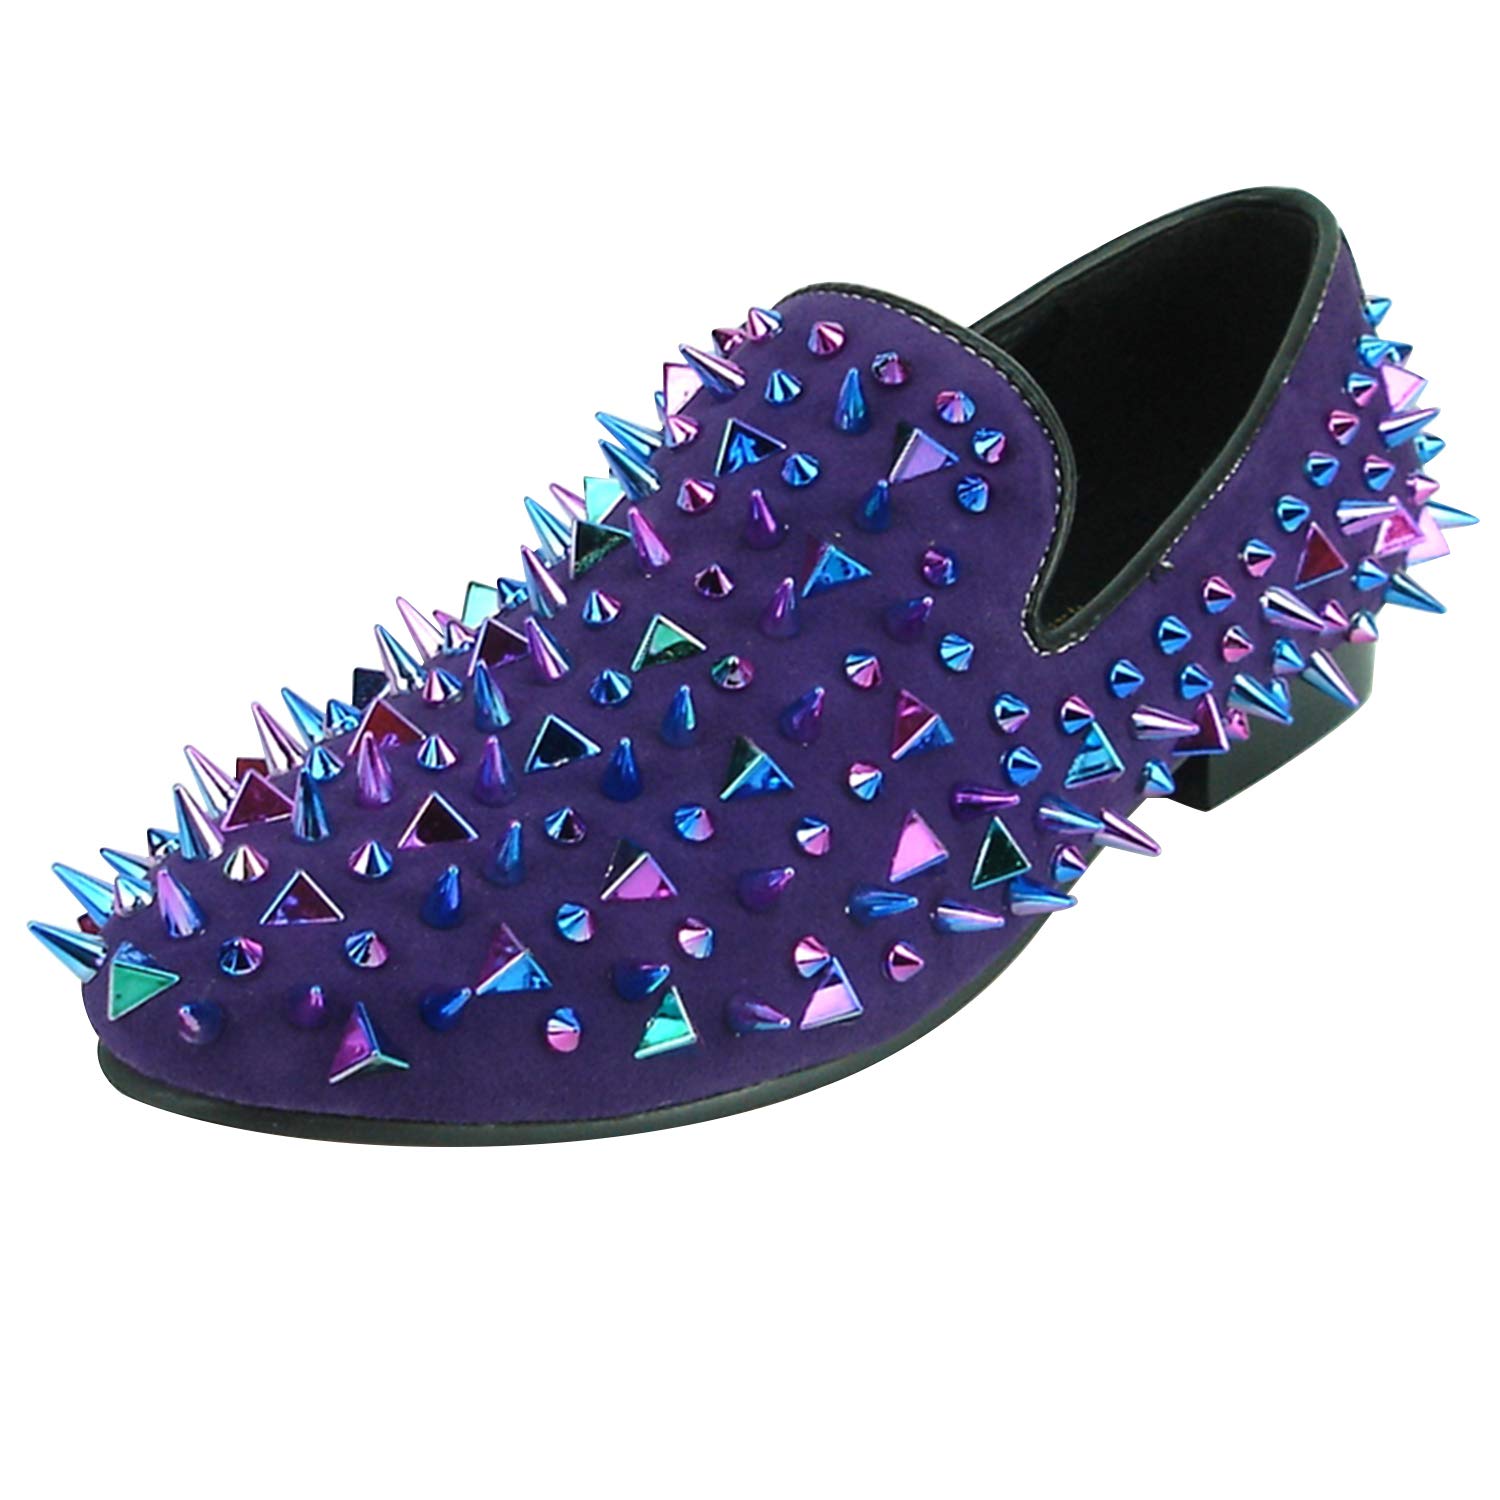 FI-6892 Purple Suede Leather Fiesso Loafer Gold Metal Tip and Gold Back Spikes 